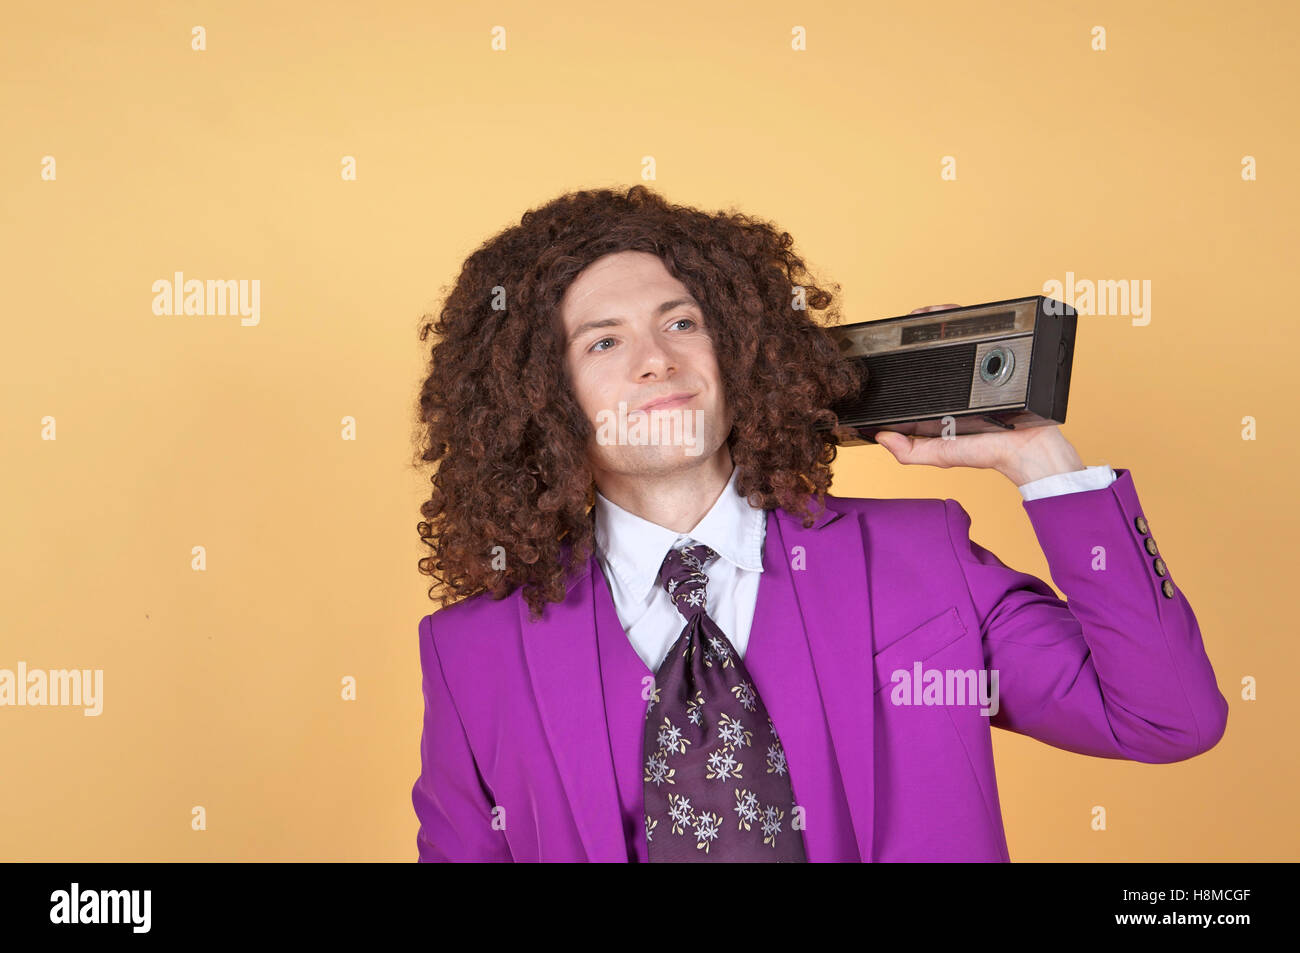 Caucasian man with afro wearing Purple Suit listening to music Stock Photo